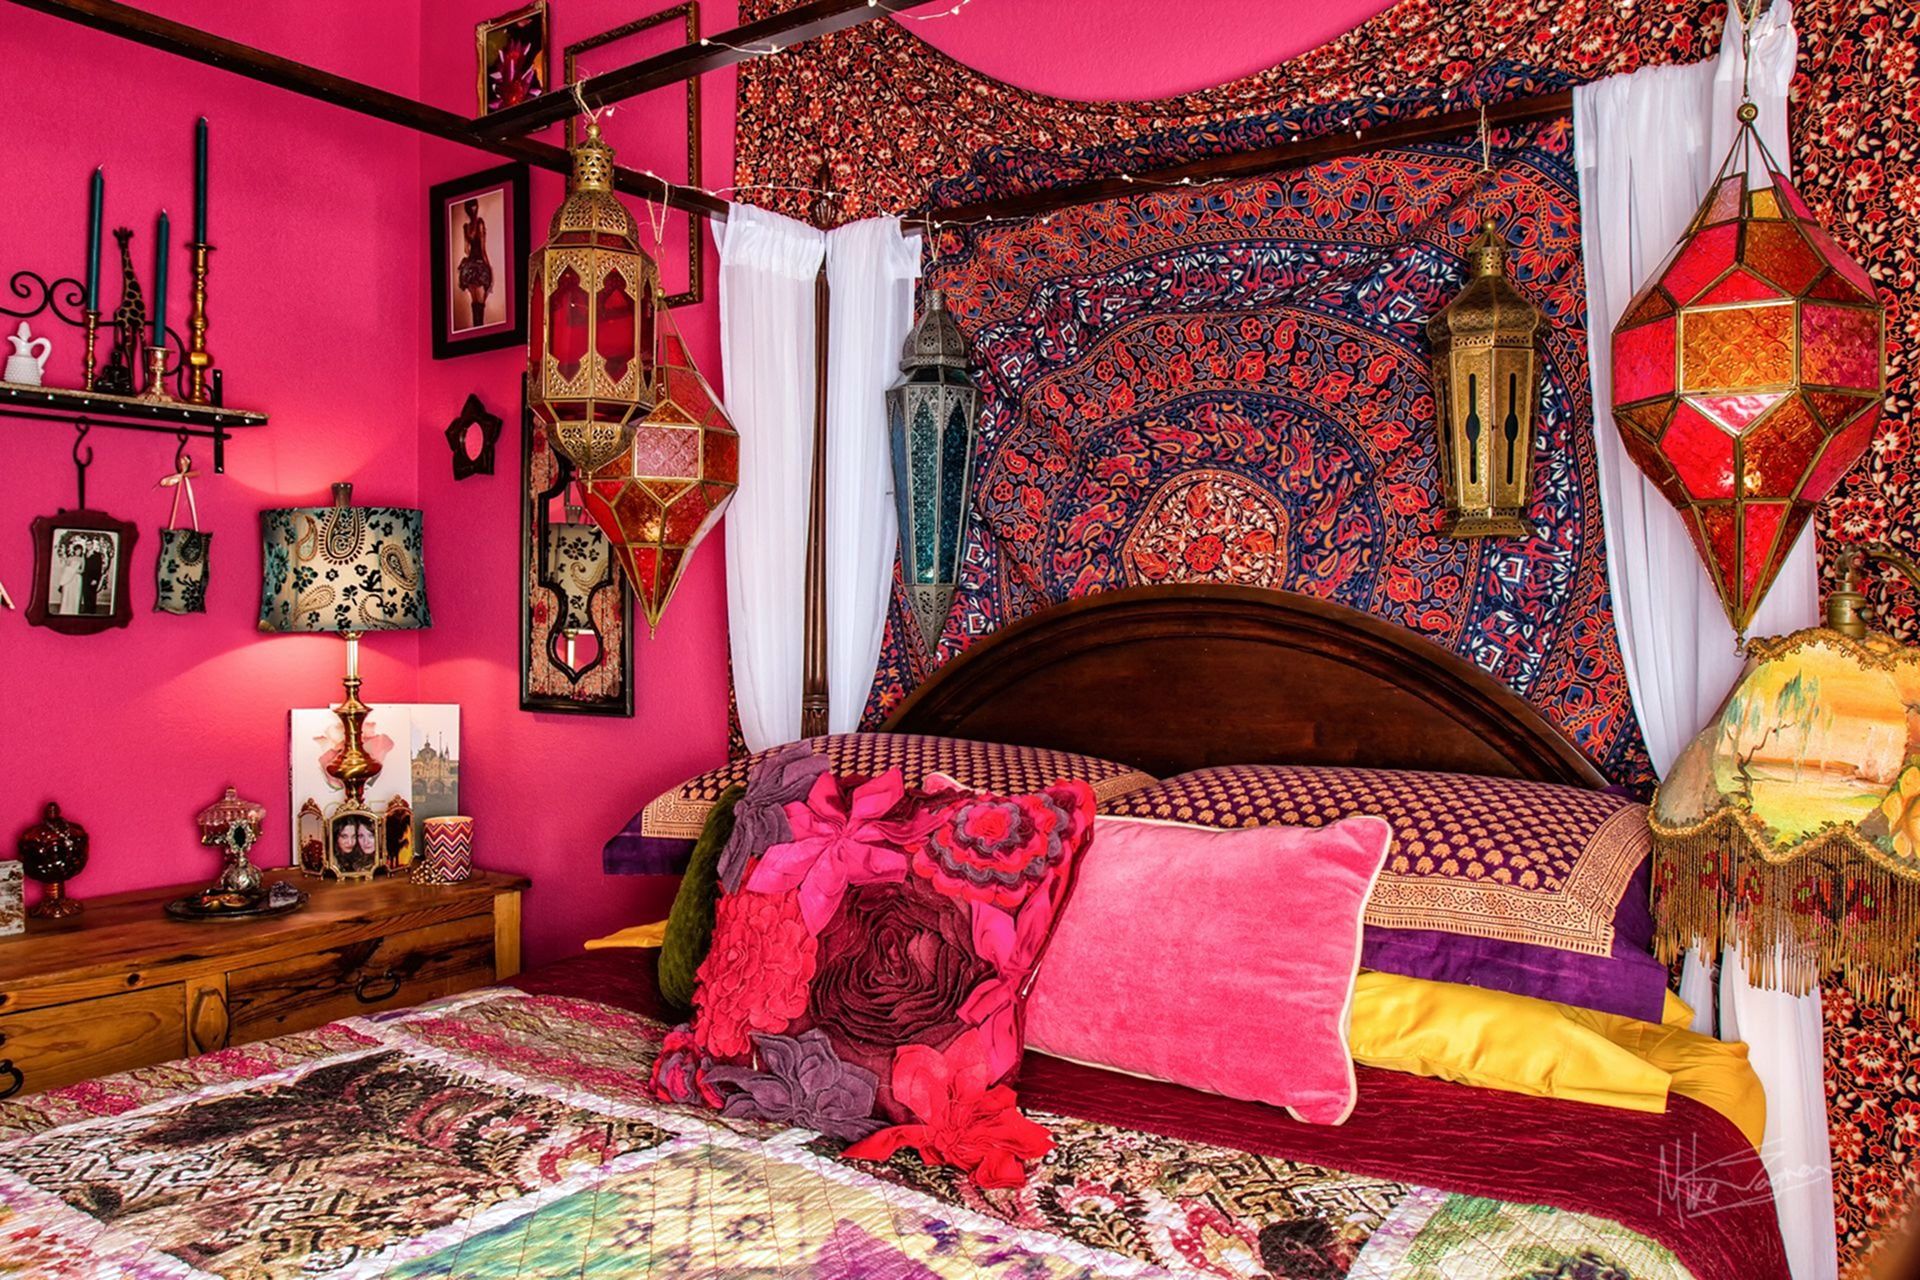 Bohemian Bedroom Style From Superhitideas